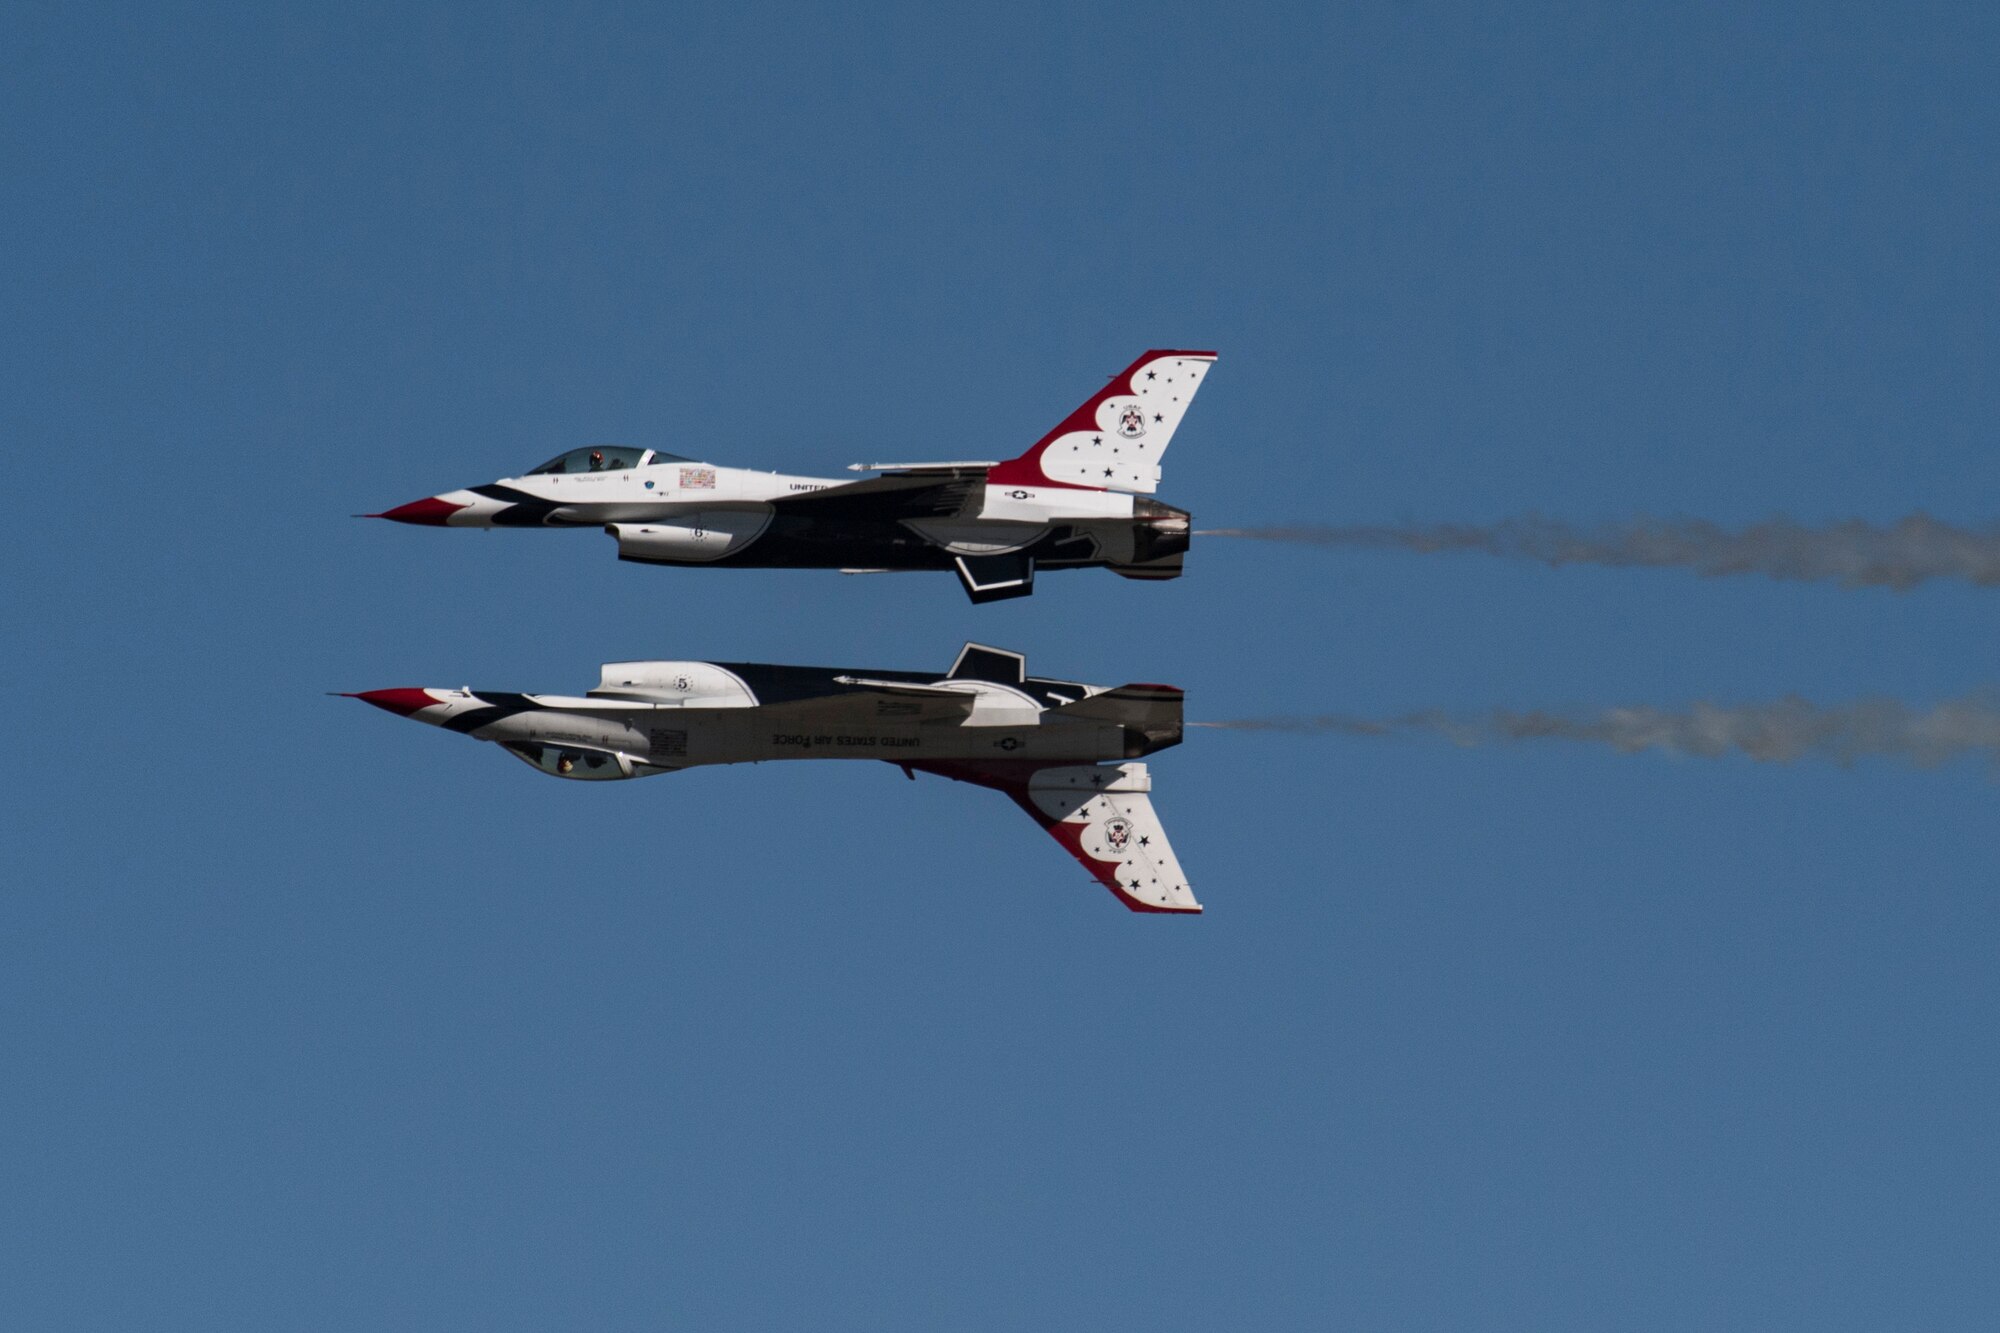 The U.S. Air Force Thunderbirds Flight Demonstration Team soars above Moody Air Force Base during the Thunder Over South Georgia Air Show, Oct. 29, 2017. The Thunderbirds, based out of Nellis Air Force Base, Nev., are the Air Force’s premier aerial demonstration team, performing at air shows and special events worldwide. (U.S. Air Force photo by Senior Airman Daniel Snider)